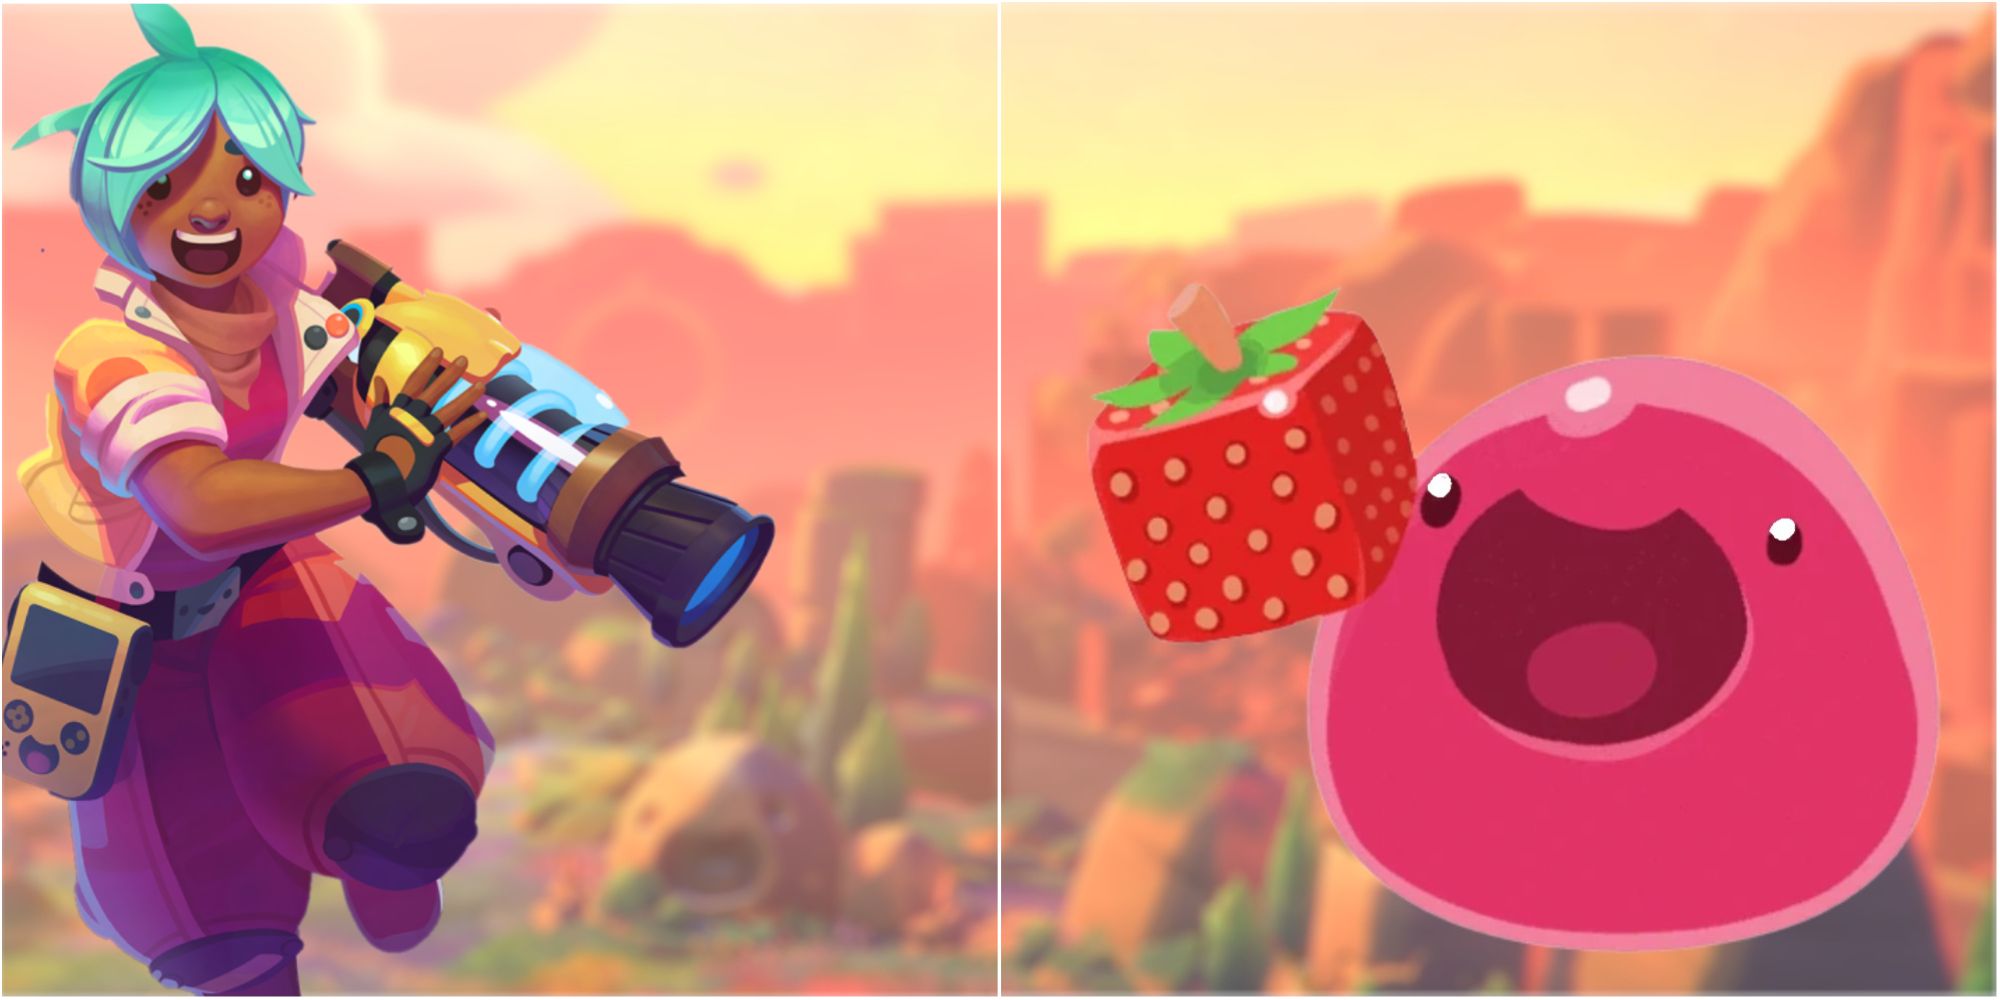 Slime Rancher 2 Early Access Review